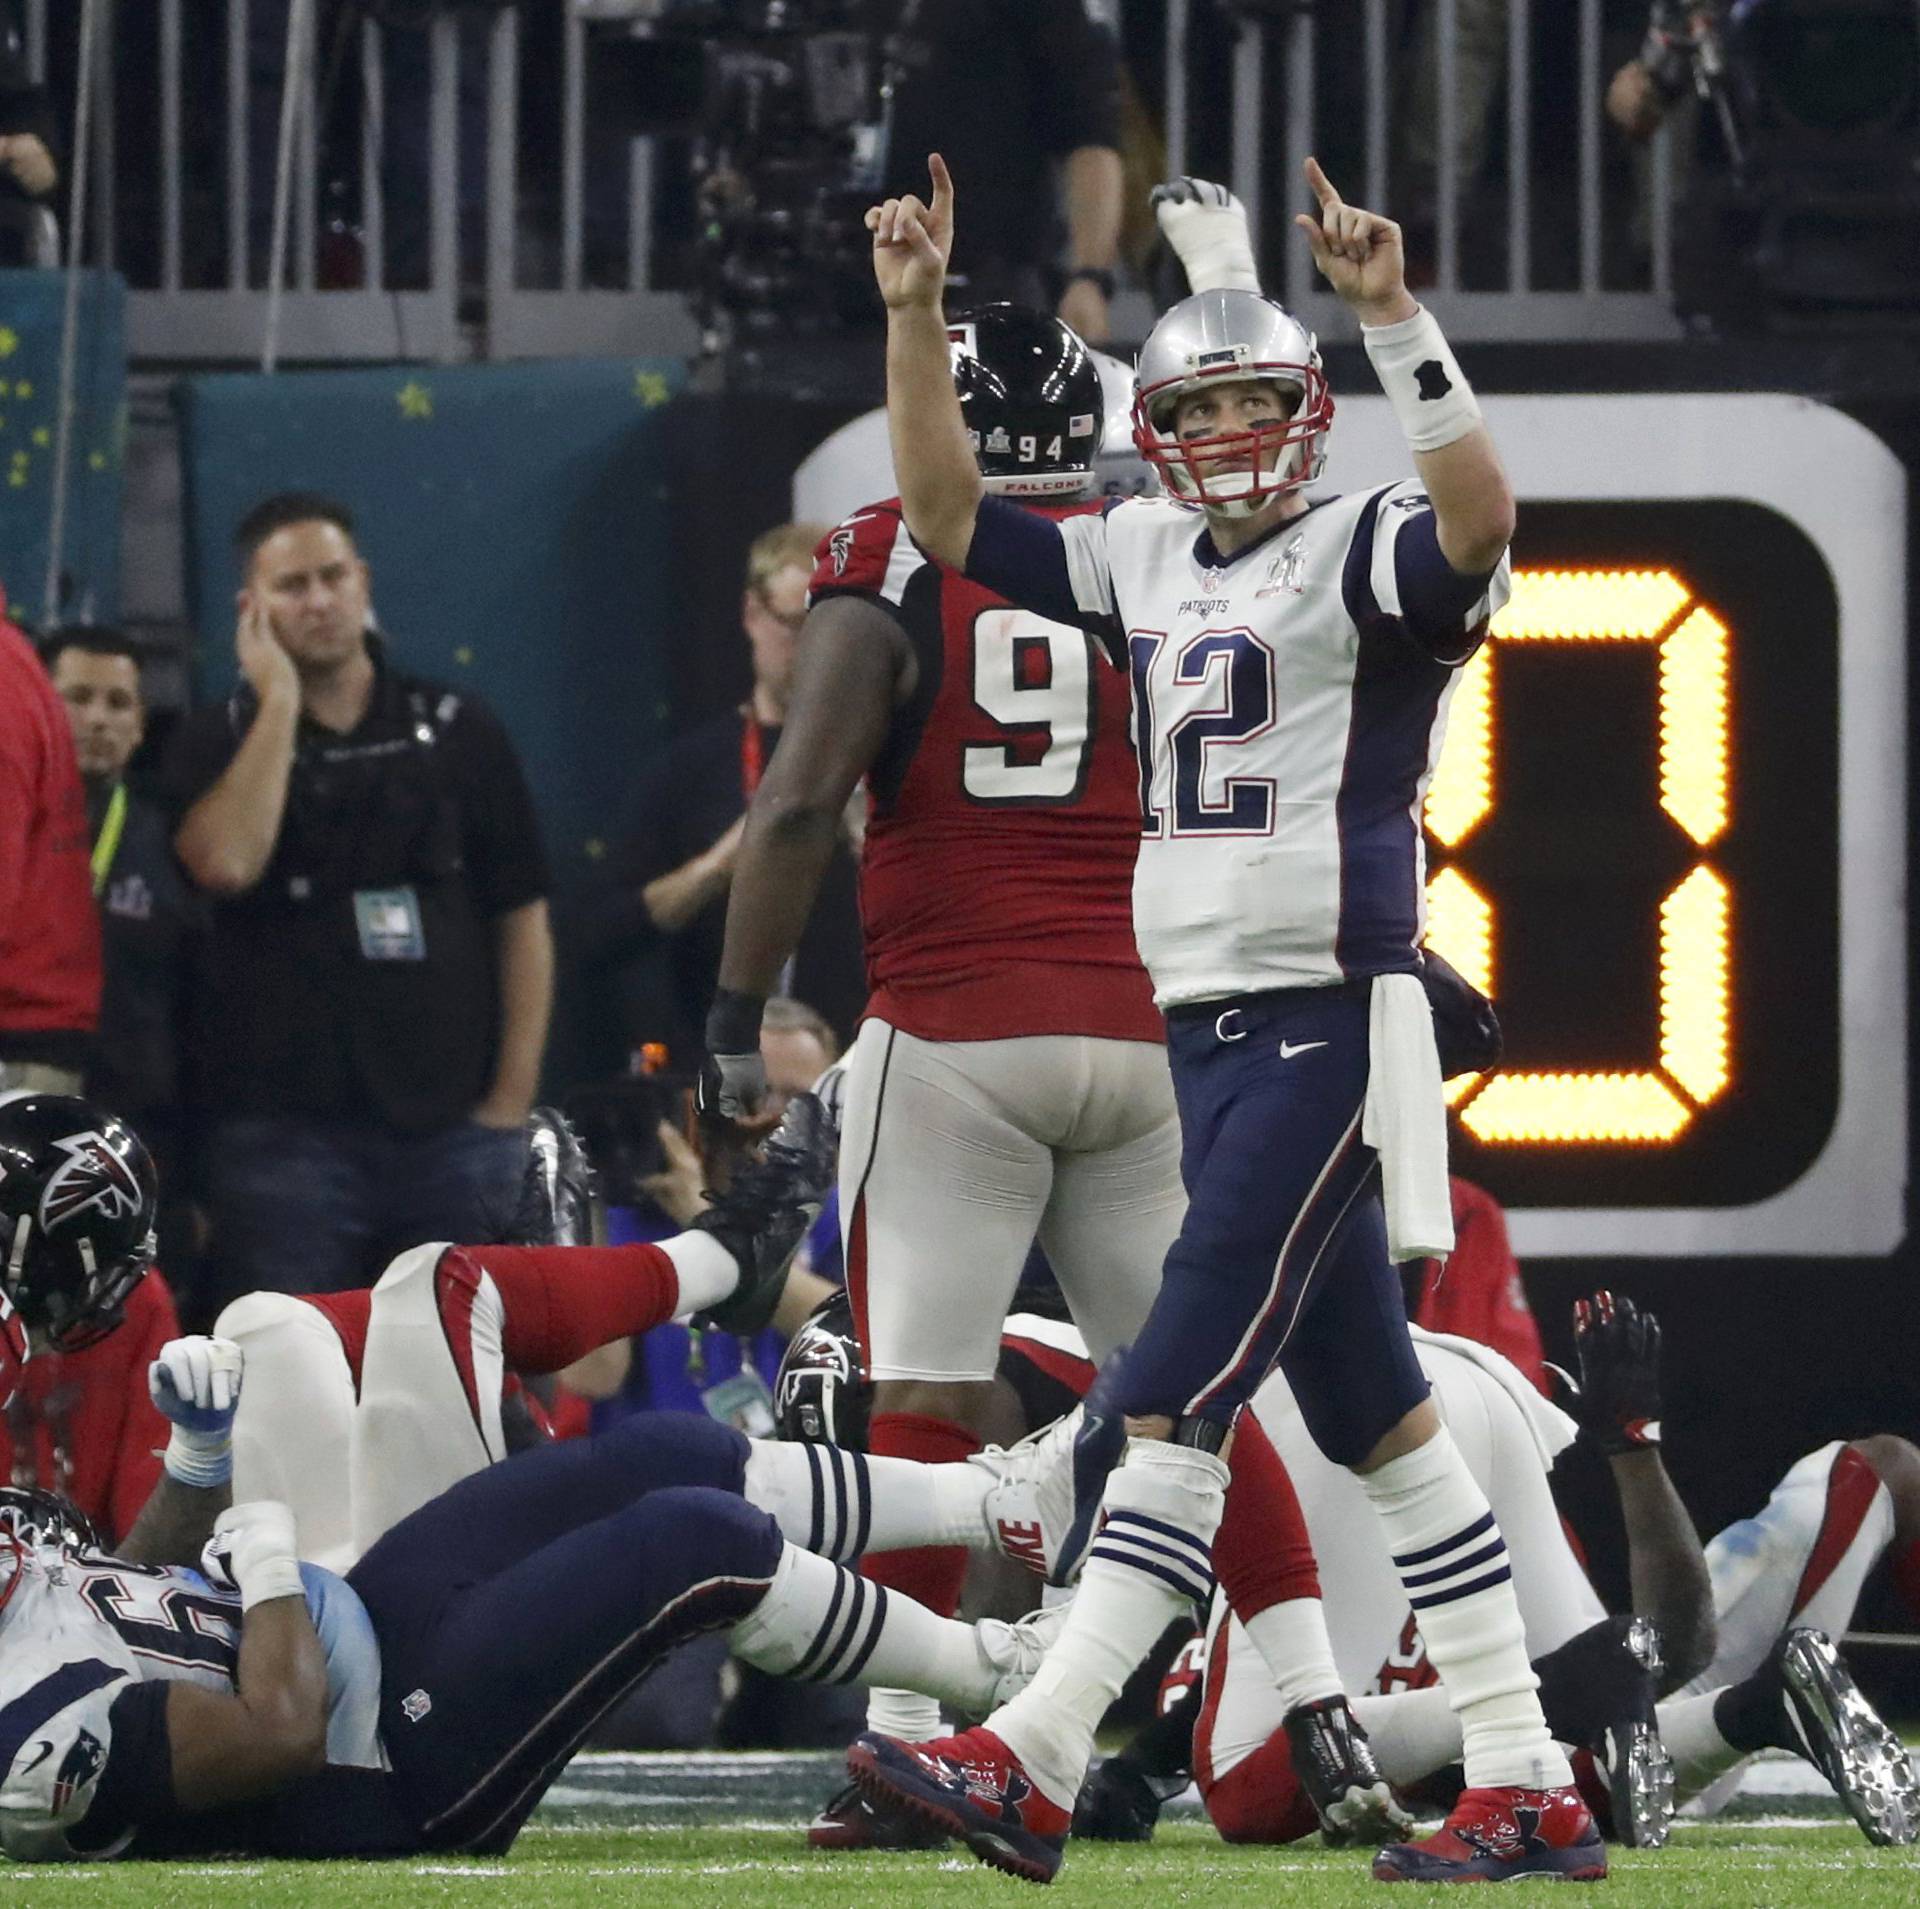 New England Patriots' quarterback Brady celebrates after James White scored a touchdown in the fourth quarter against the Atlanta Falcons at Super Bowl LI in Houston